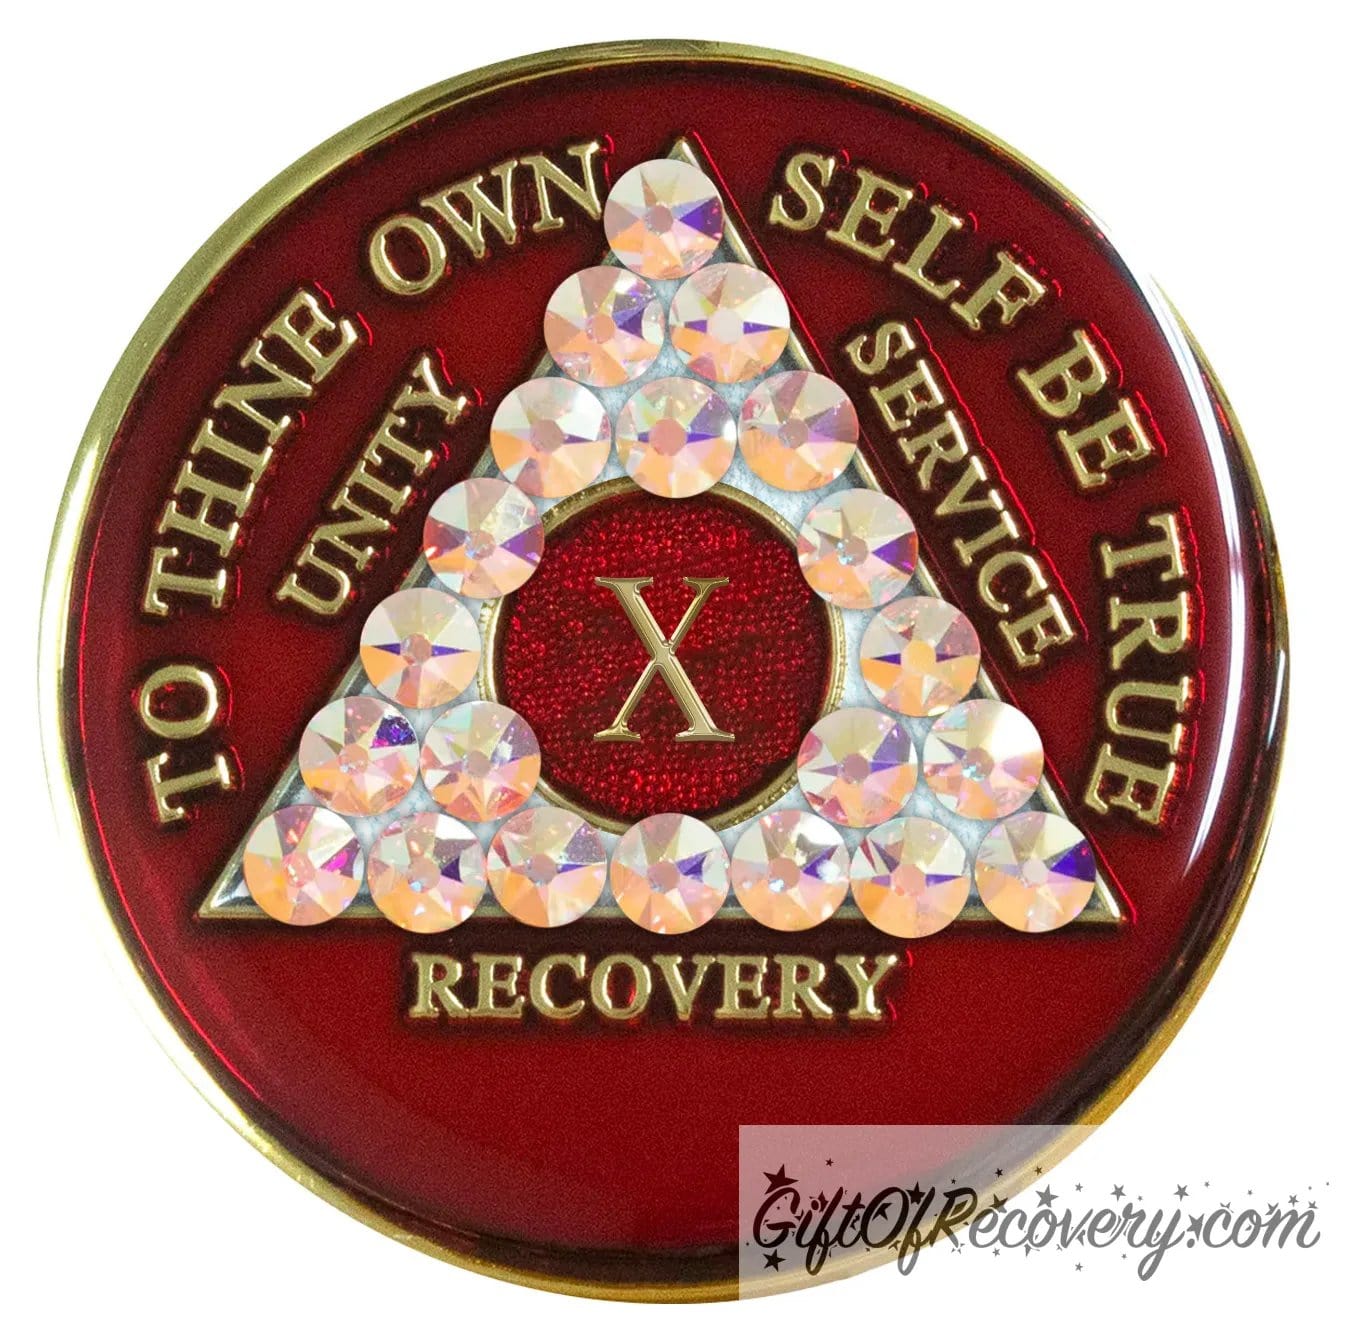 10 year AA medallion ruby red with 21 Aurora Borealis genuine crystals in the shape of the triangle and to thine own self be true, unity, service, recovery, and roman numeral are embossed with 14k gold-plated brass, the medallion is sealed with resin for a shiny finish that lasts.